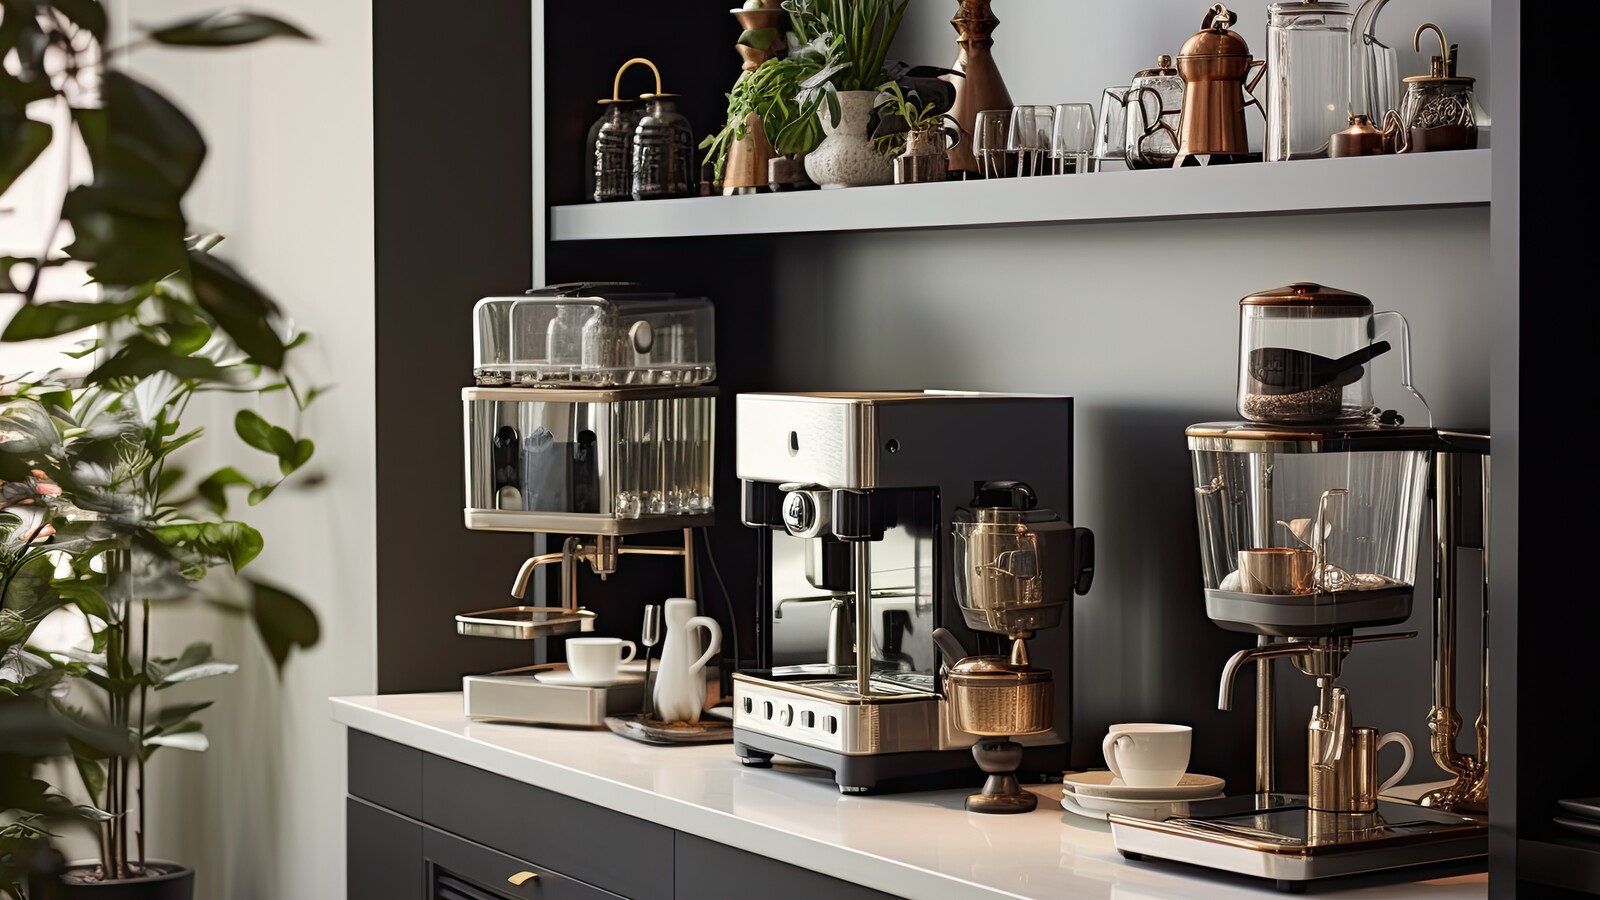 10 Coffee Accessories You Need To Craft a Classy Morning Brew at Home